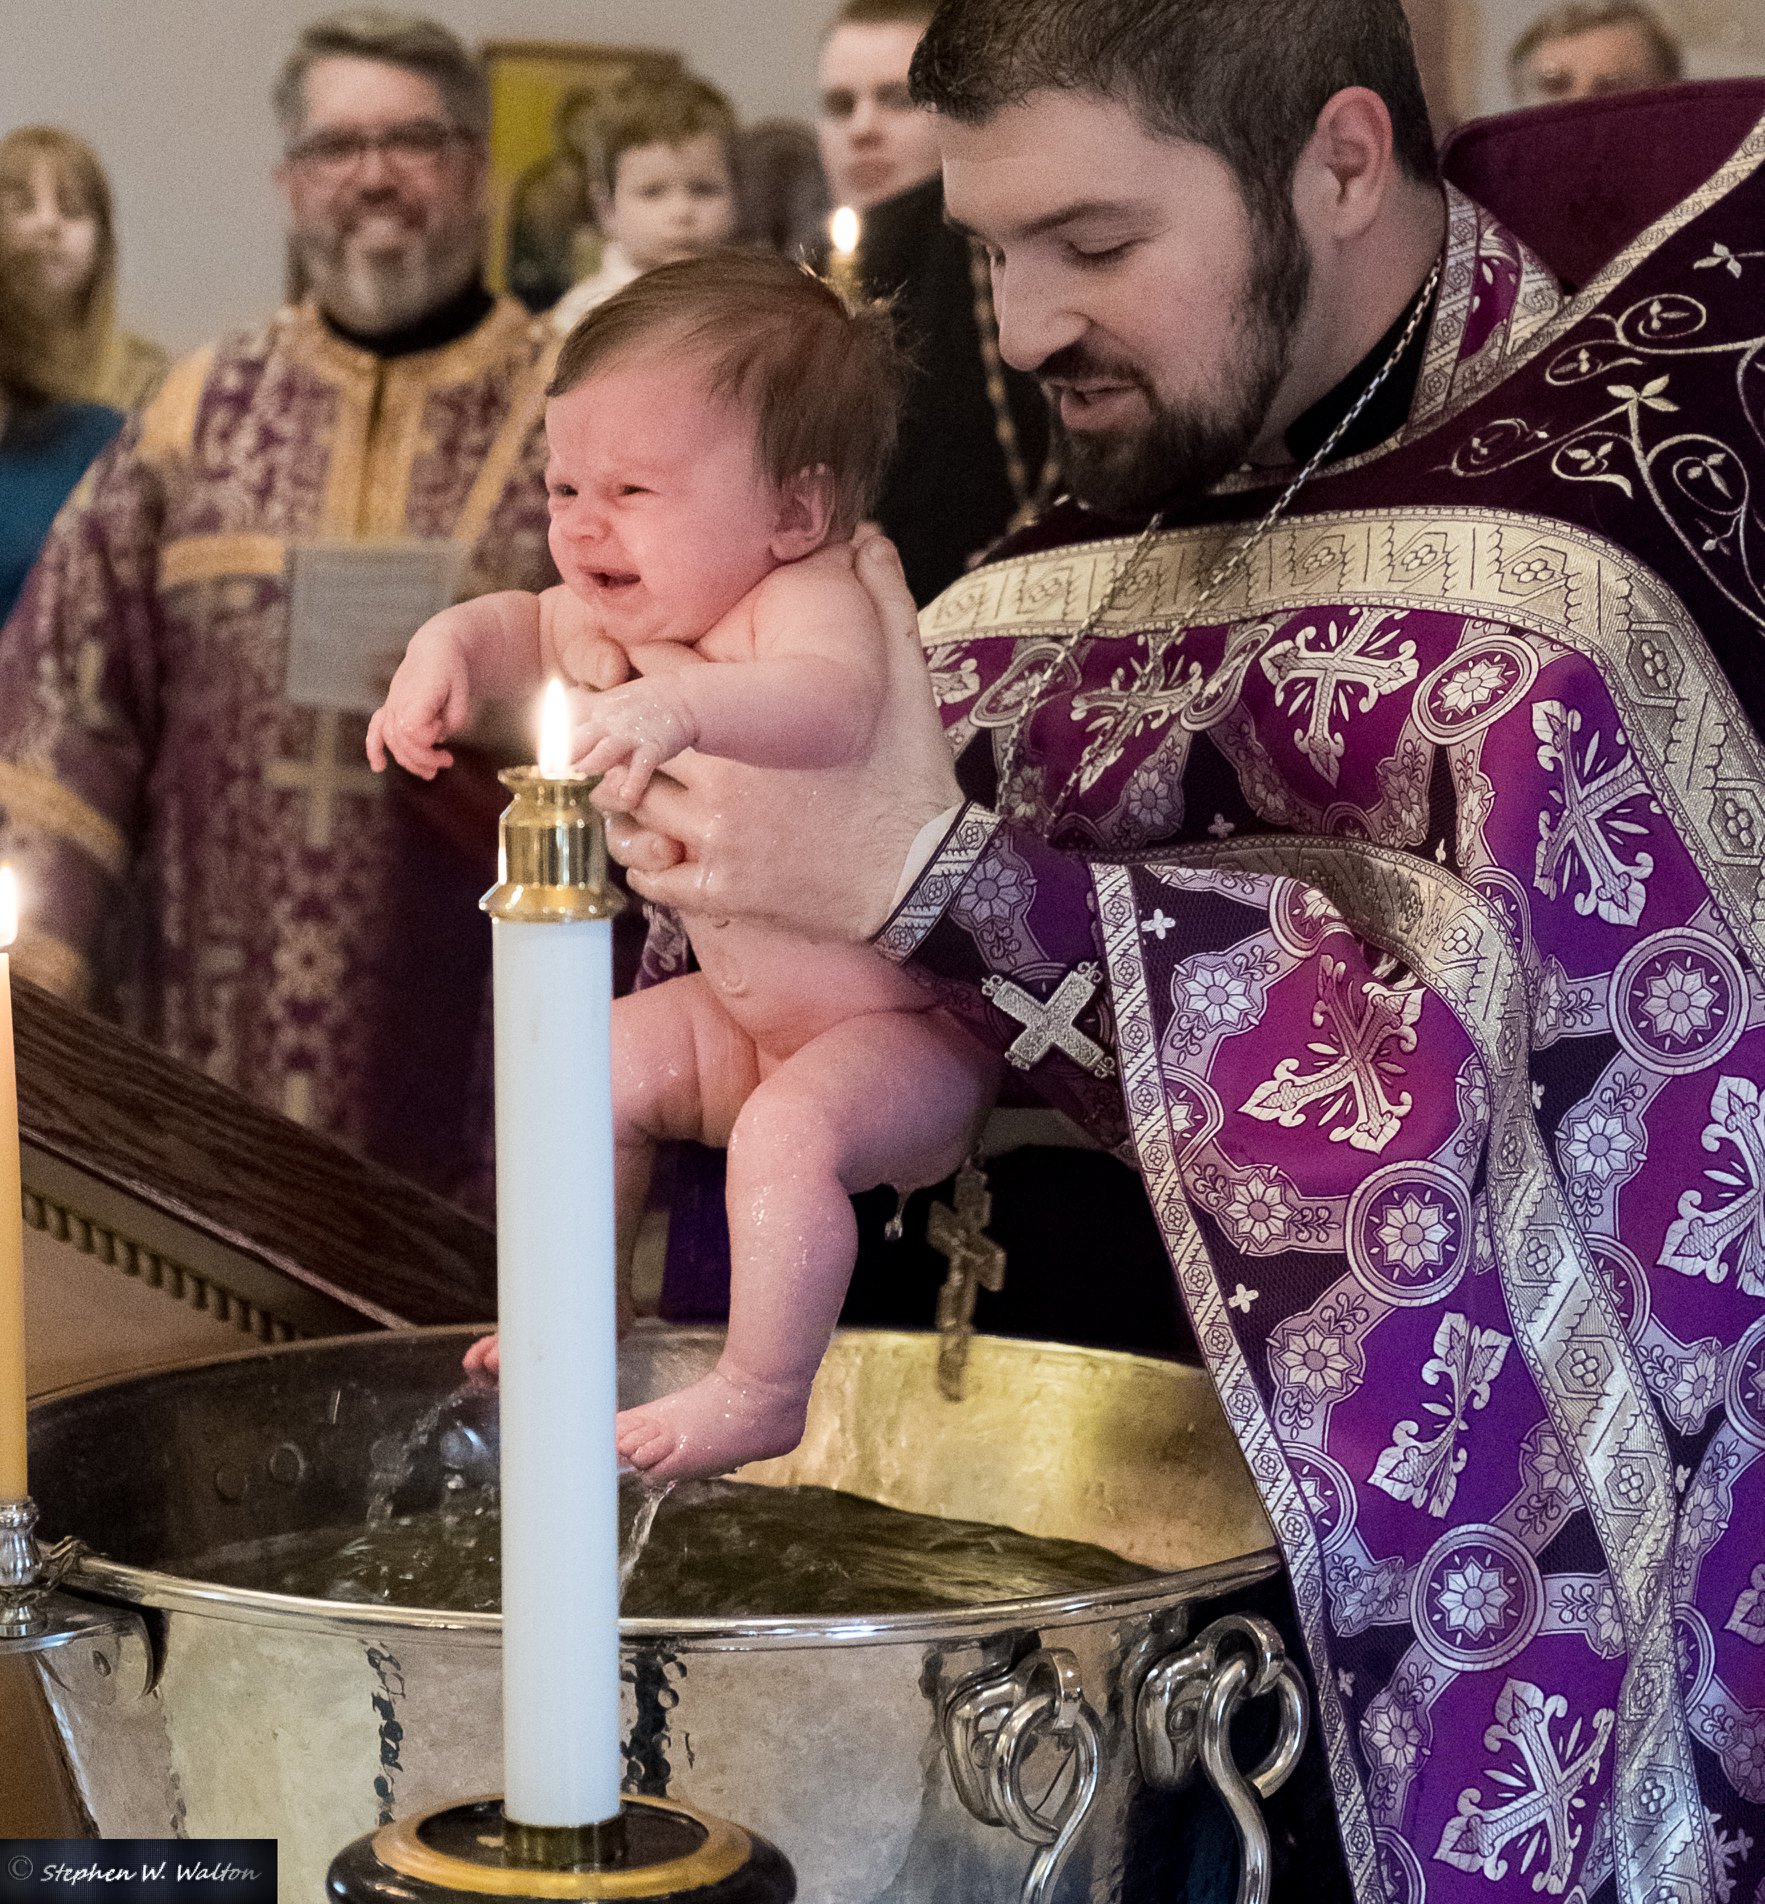  priest lifting infant out of baptismal font  